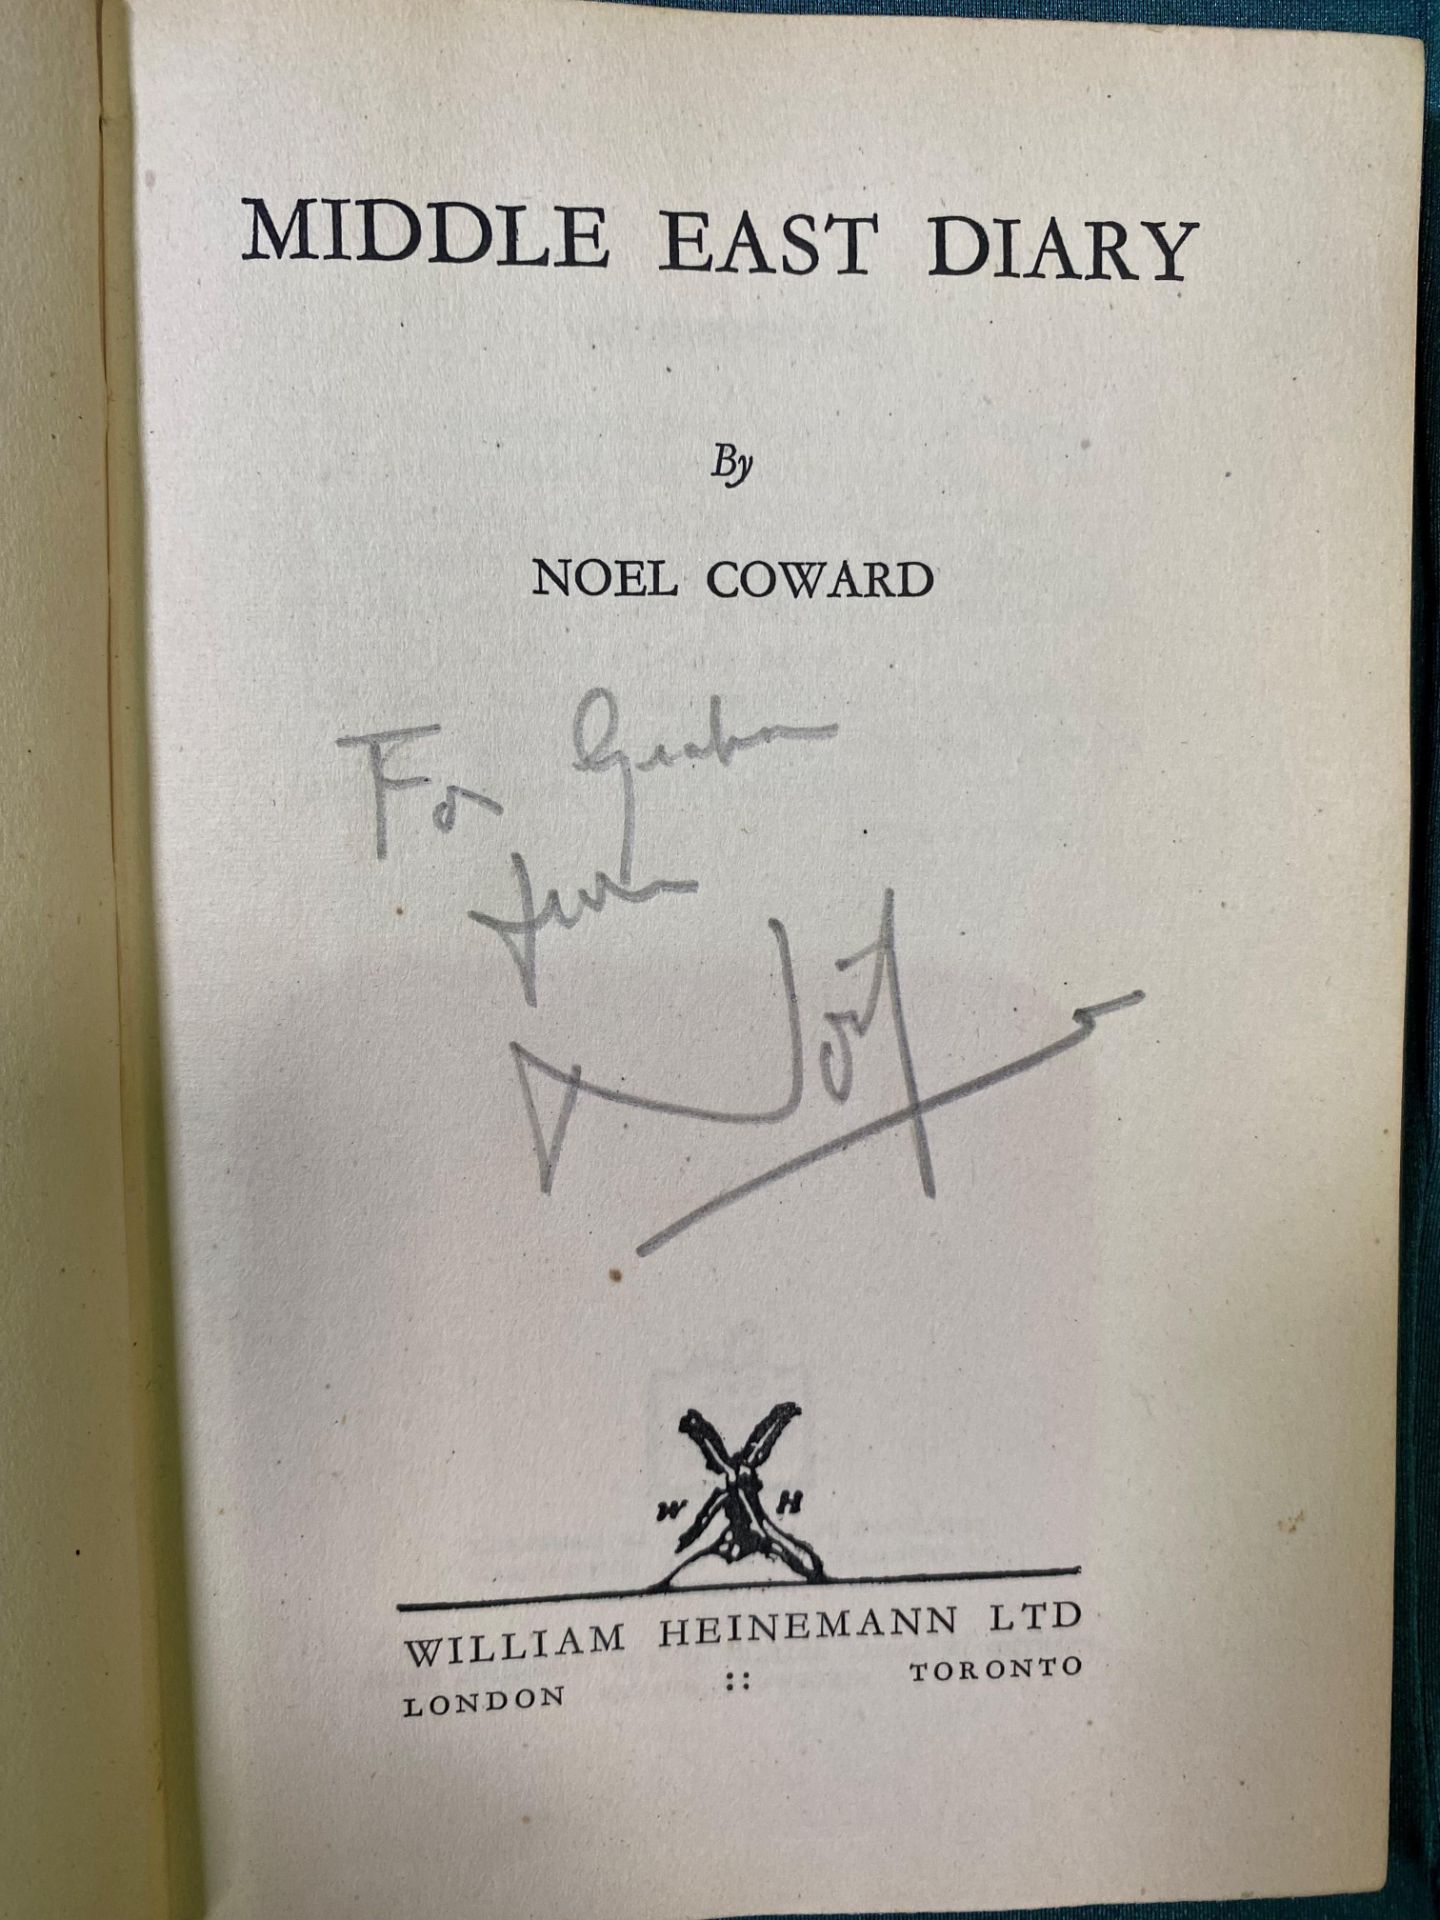 Noel Coward, Middle East Diary, first edition, William Heinemann Ltd, 1944 - Image 7 of 7